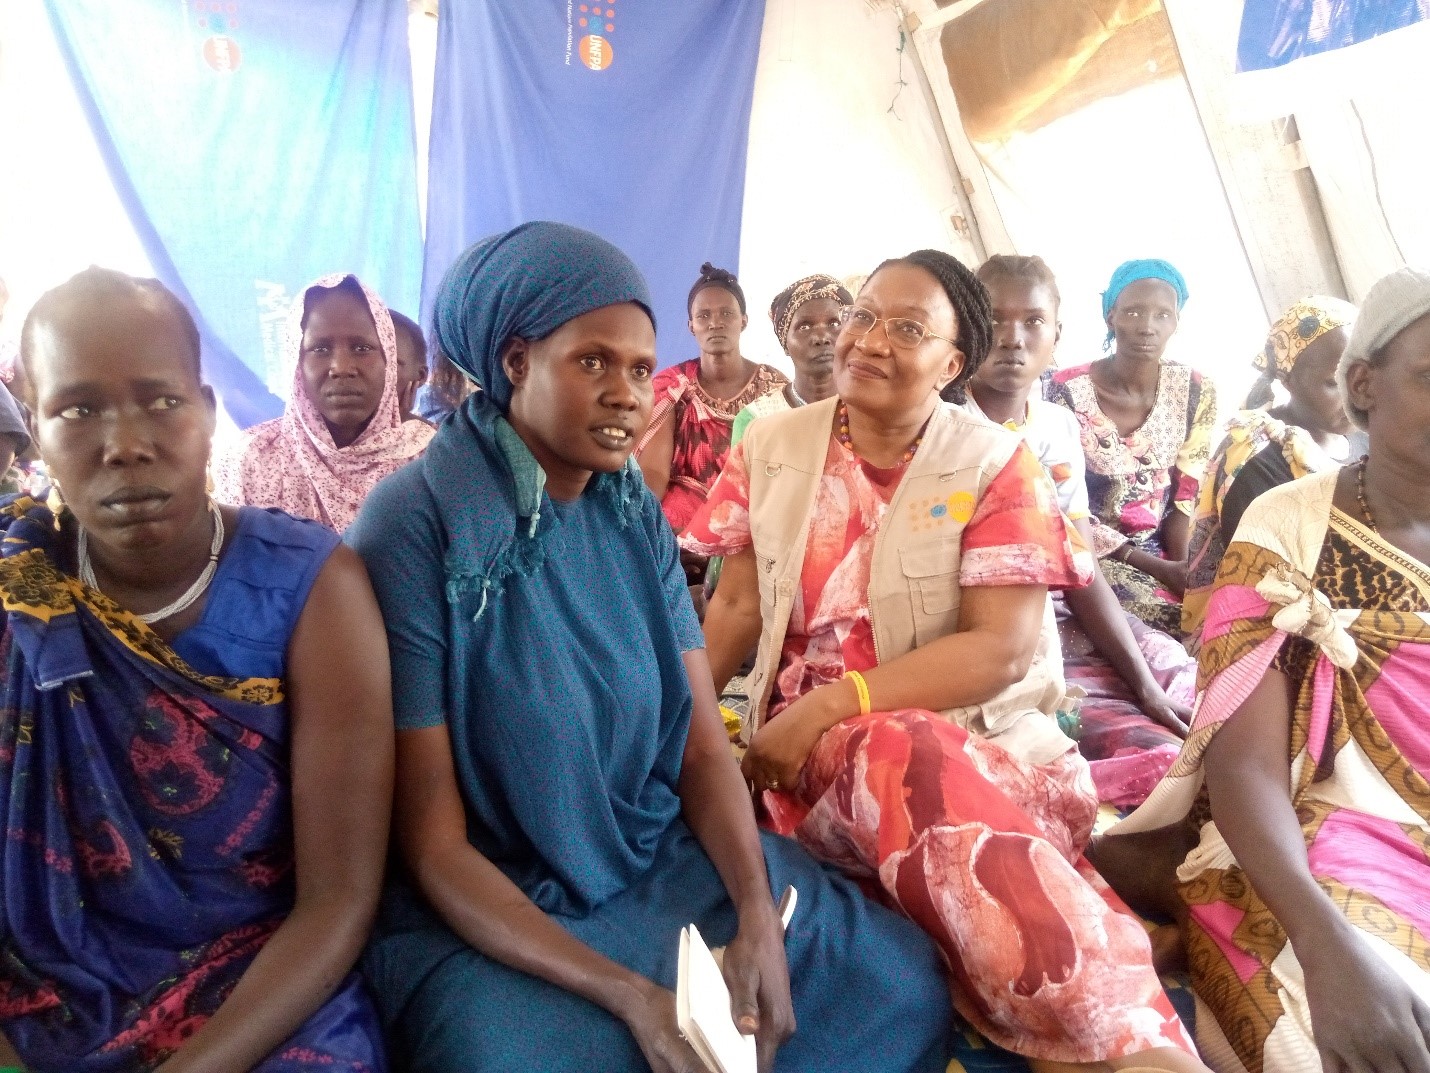 South Sudanese women urged to protect girls against SGBV